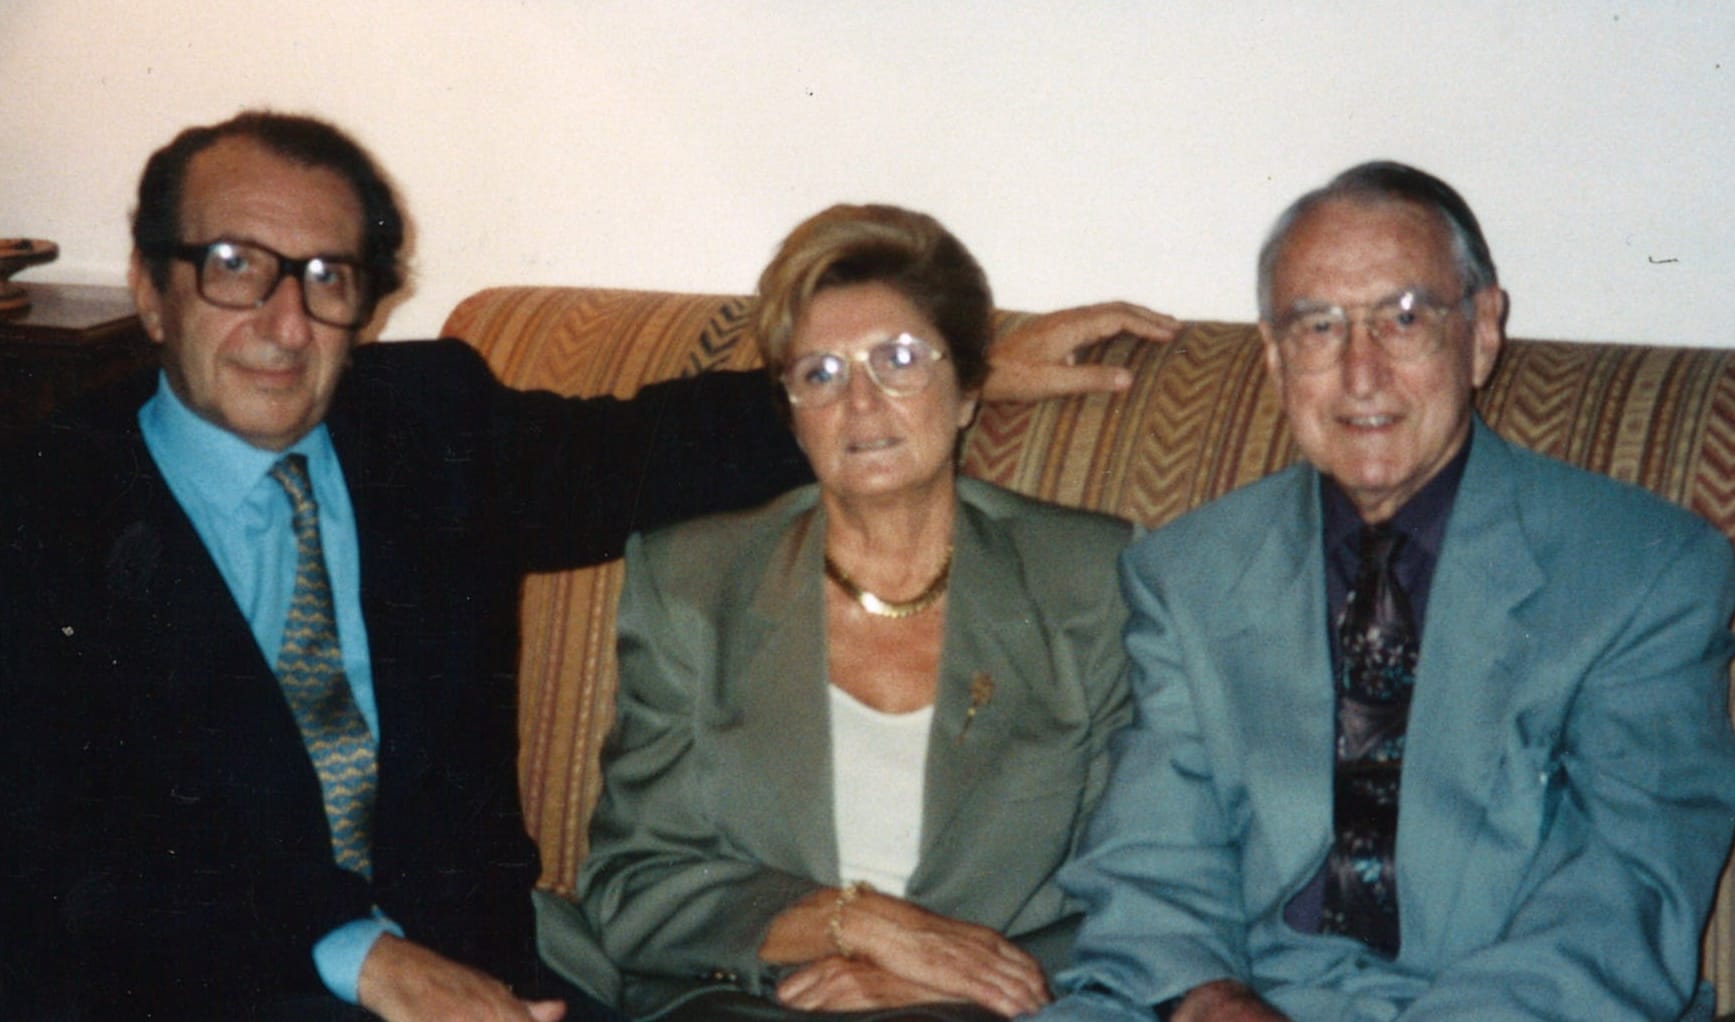 John Money in a suit on a couch with Romano Forleo and his wife.  